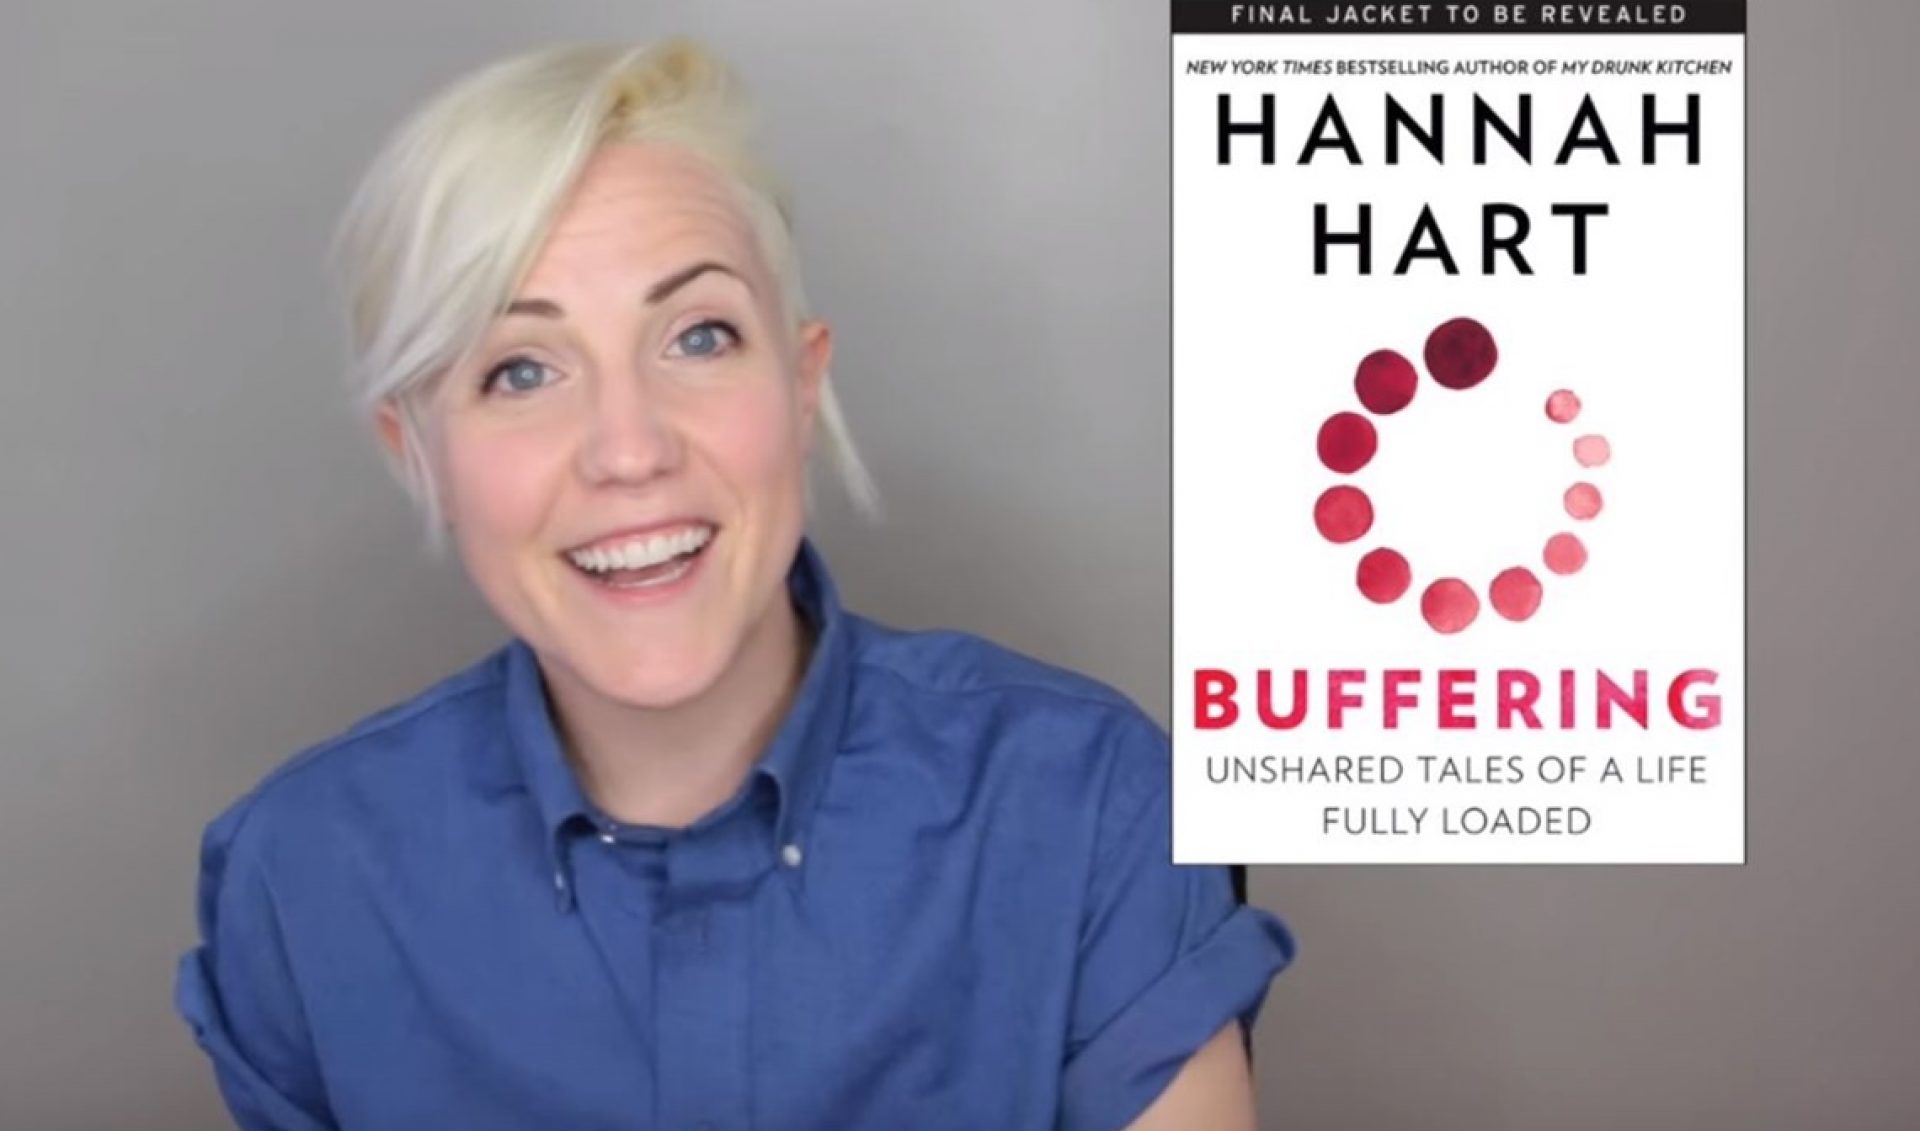 Hannah Hart Unveils Second Book Titled ‘Buffering’, A Collection Of Deeply Personal Narrative Essays